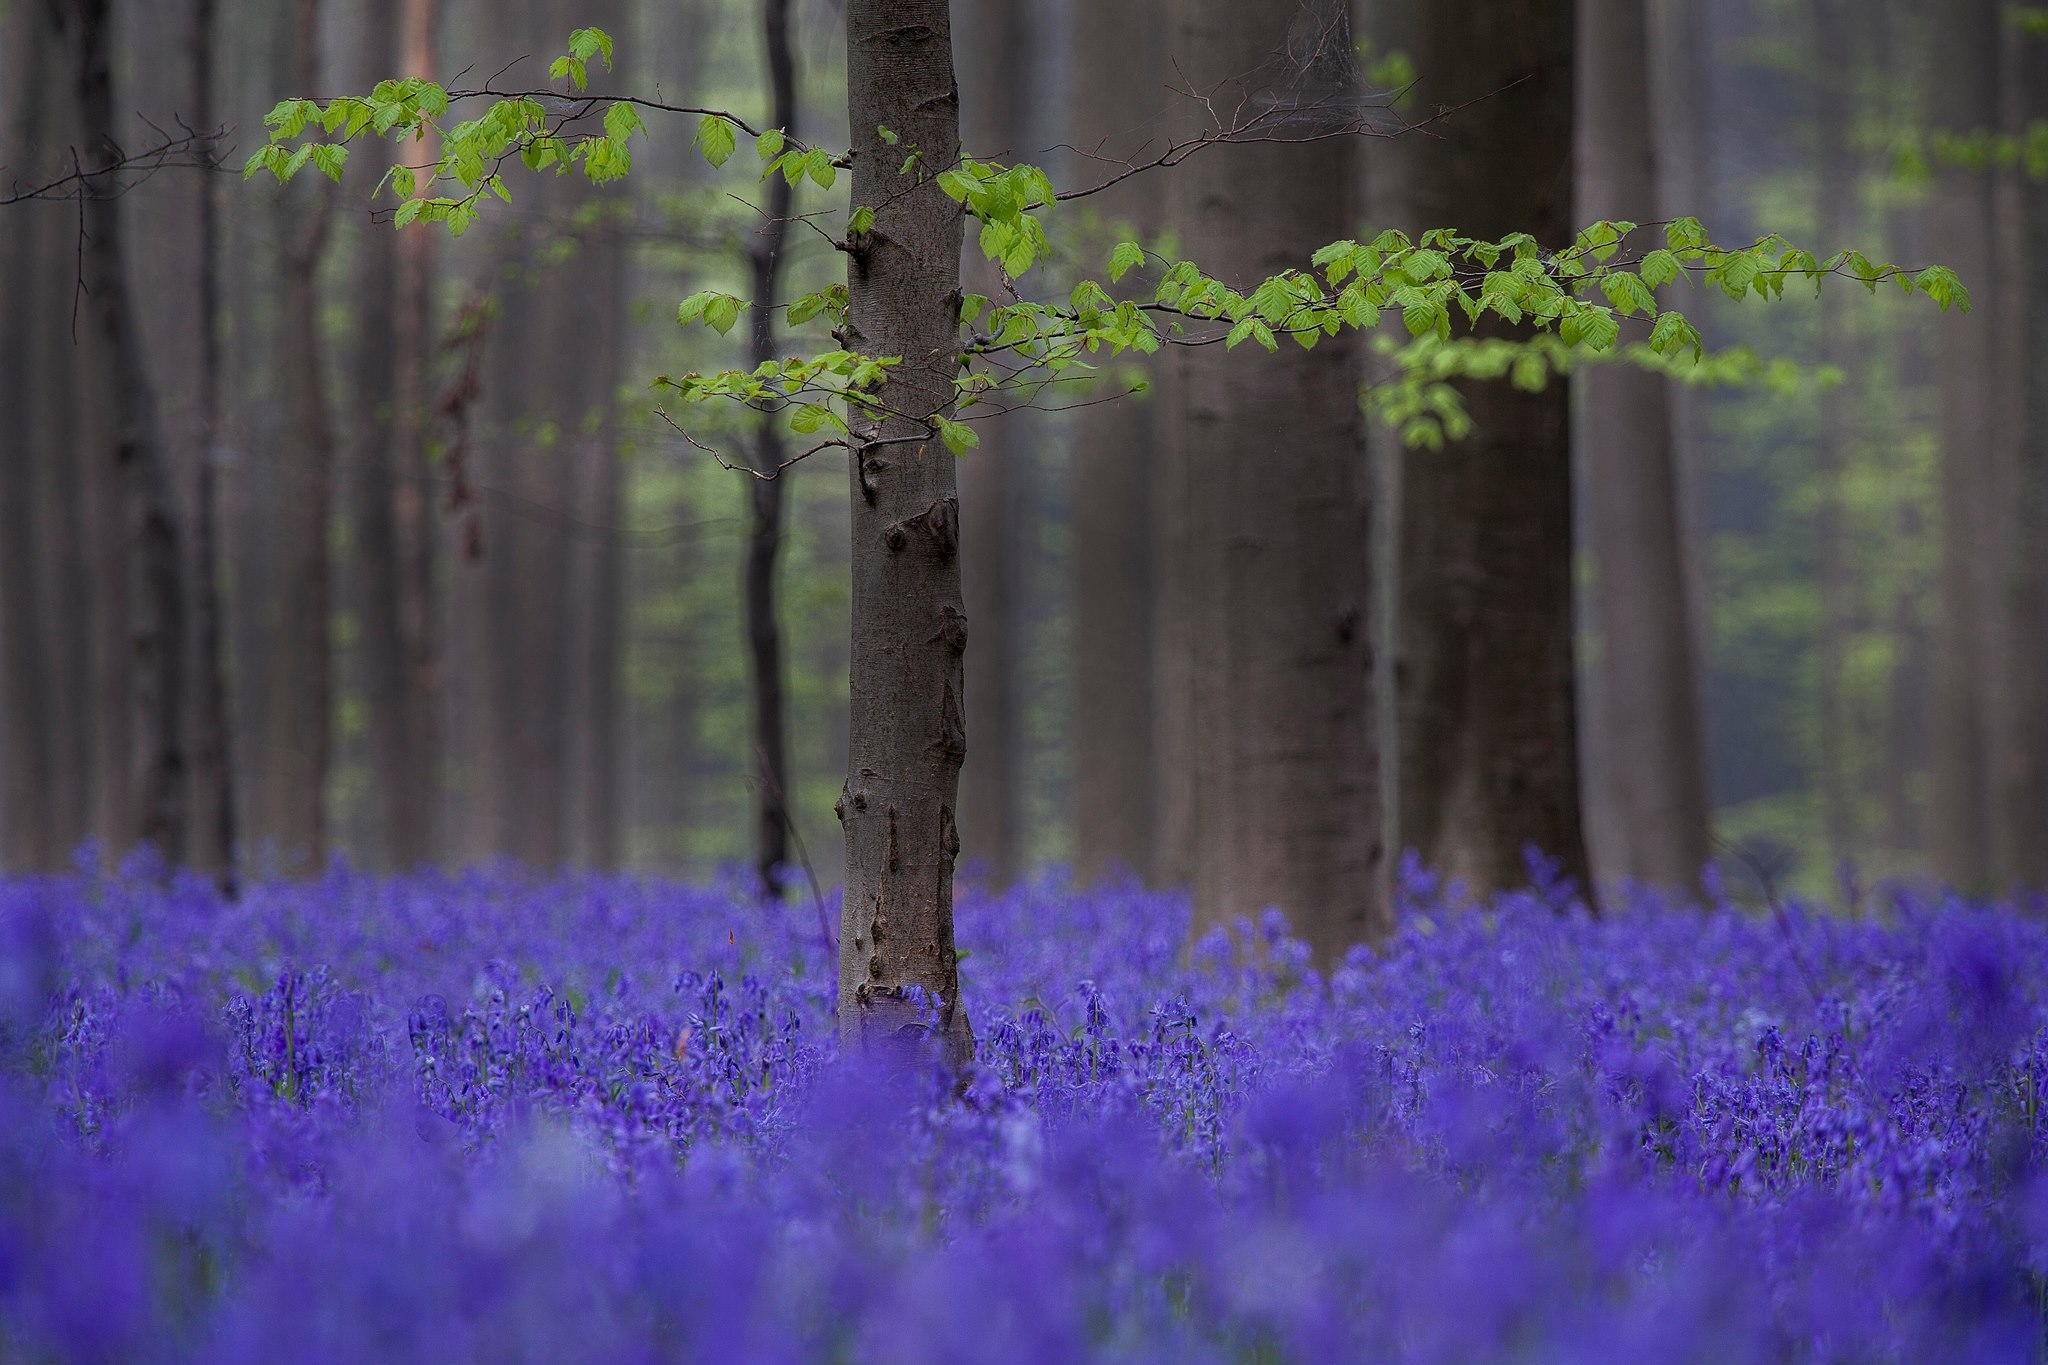 General 2048x1365 nature landscape trees forest branch leaves flowers field depth of field blue flowers spring